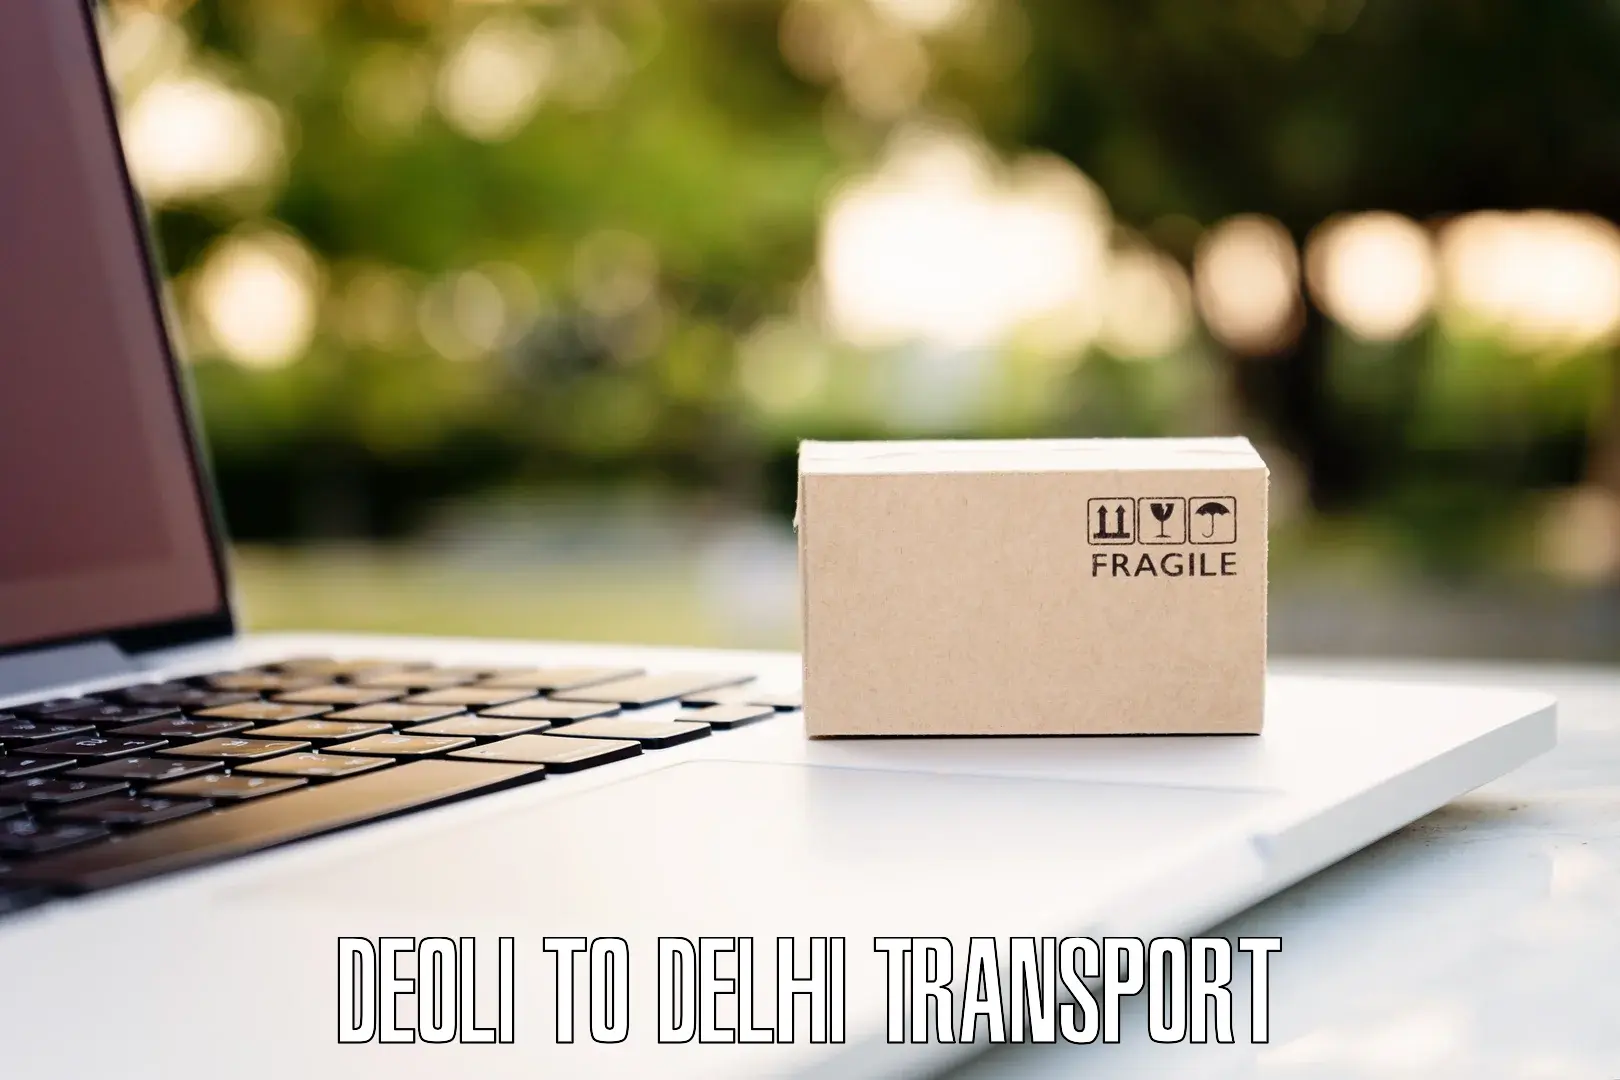 Online transport booking Deoli to Lodhi Road